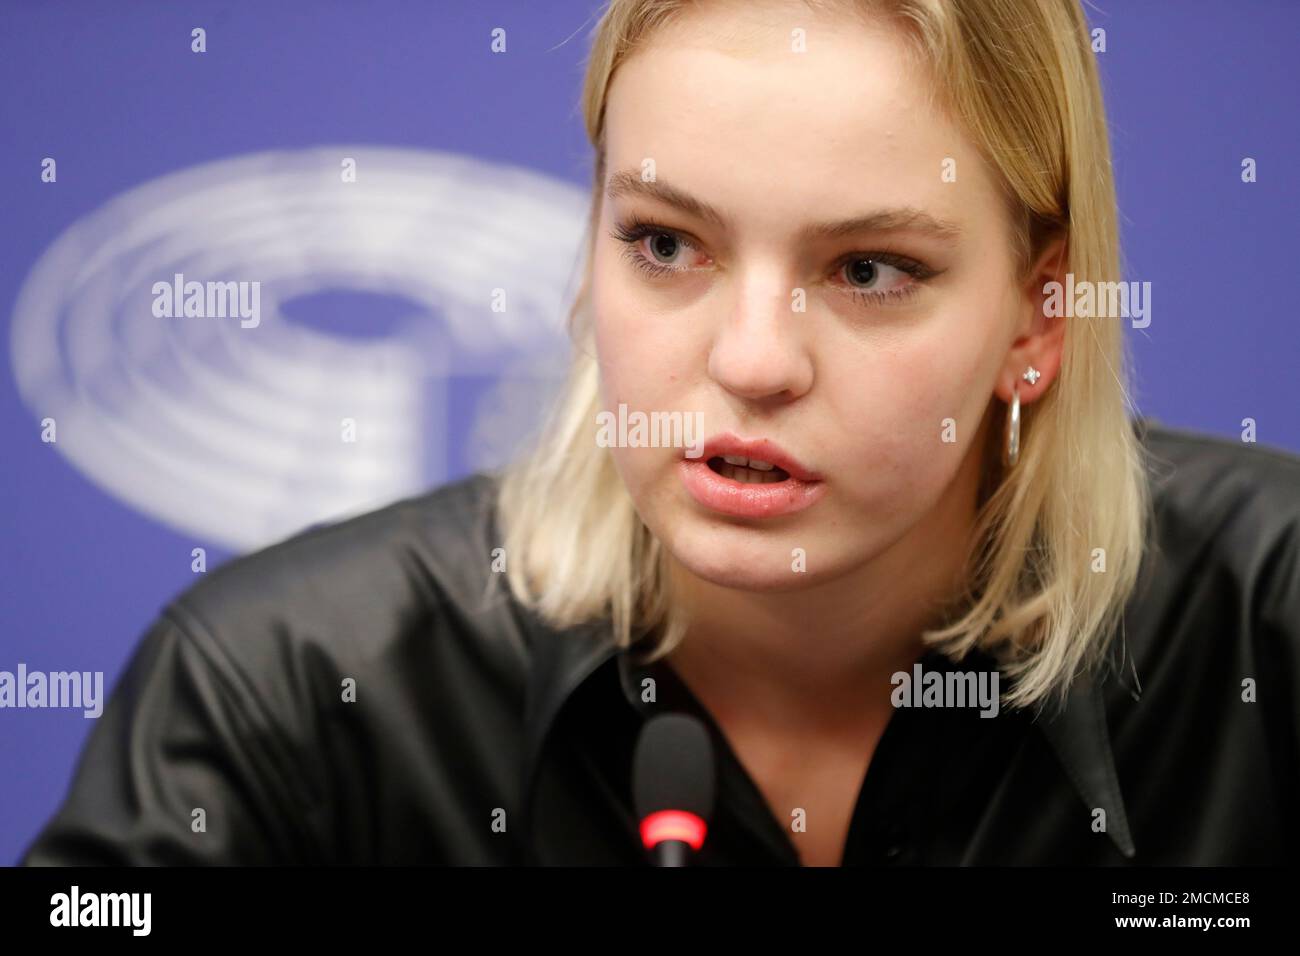 Daria Navalnaya, the daughter of jailed Russian opposition leader Alexei  Navalny, speaks at the European Parliament in Strasbourg, eastern France,  Tuesday, Dec.14, 2021. Daria Navalnaya will receive Wednesday the Sakharov  Prize for